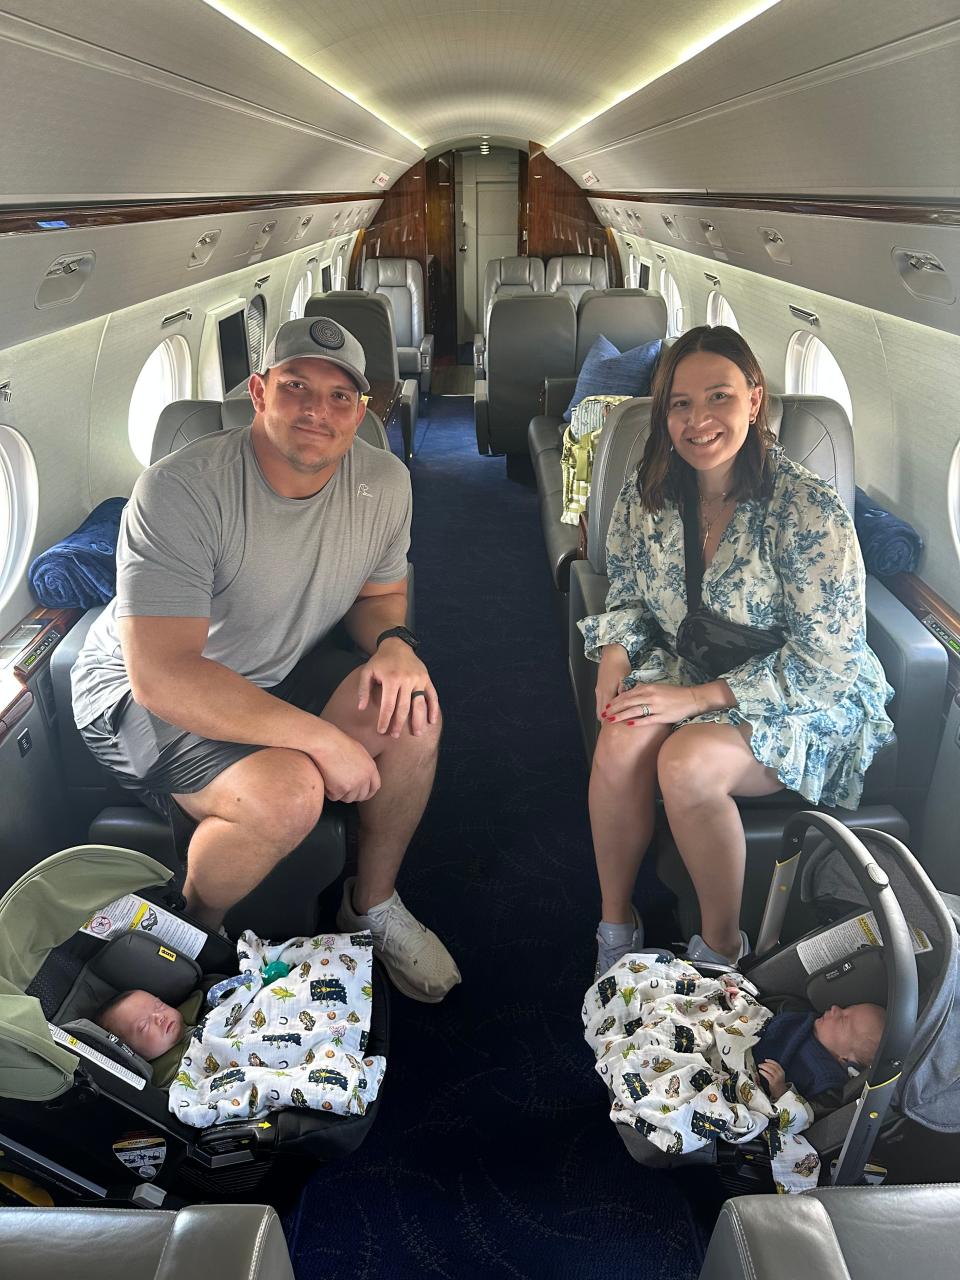 Indianapolis Colts center Ryan Kelly and his wife, Emma, on Jim Irsay's plane bringing their twin baby boys, Ford and Duke, home.